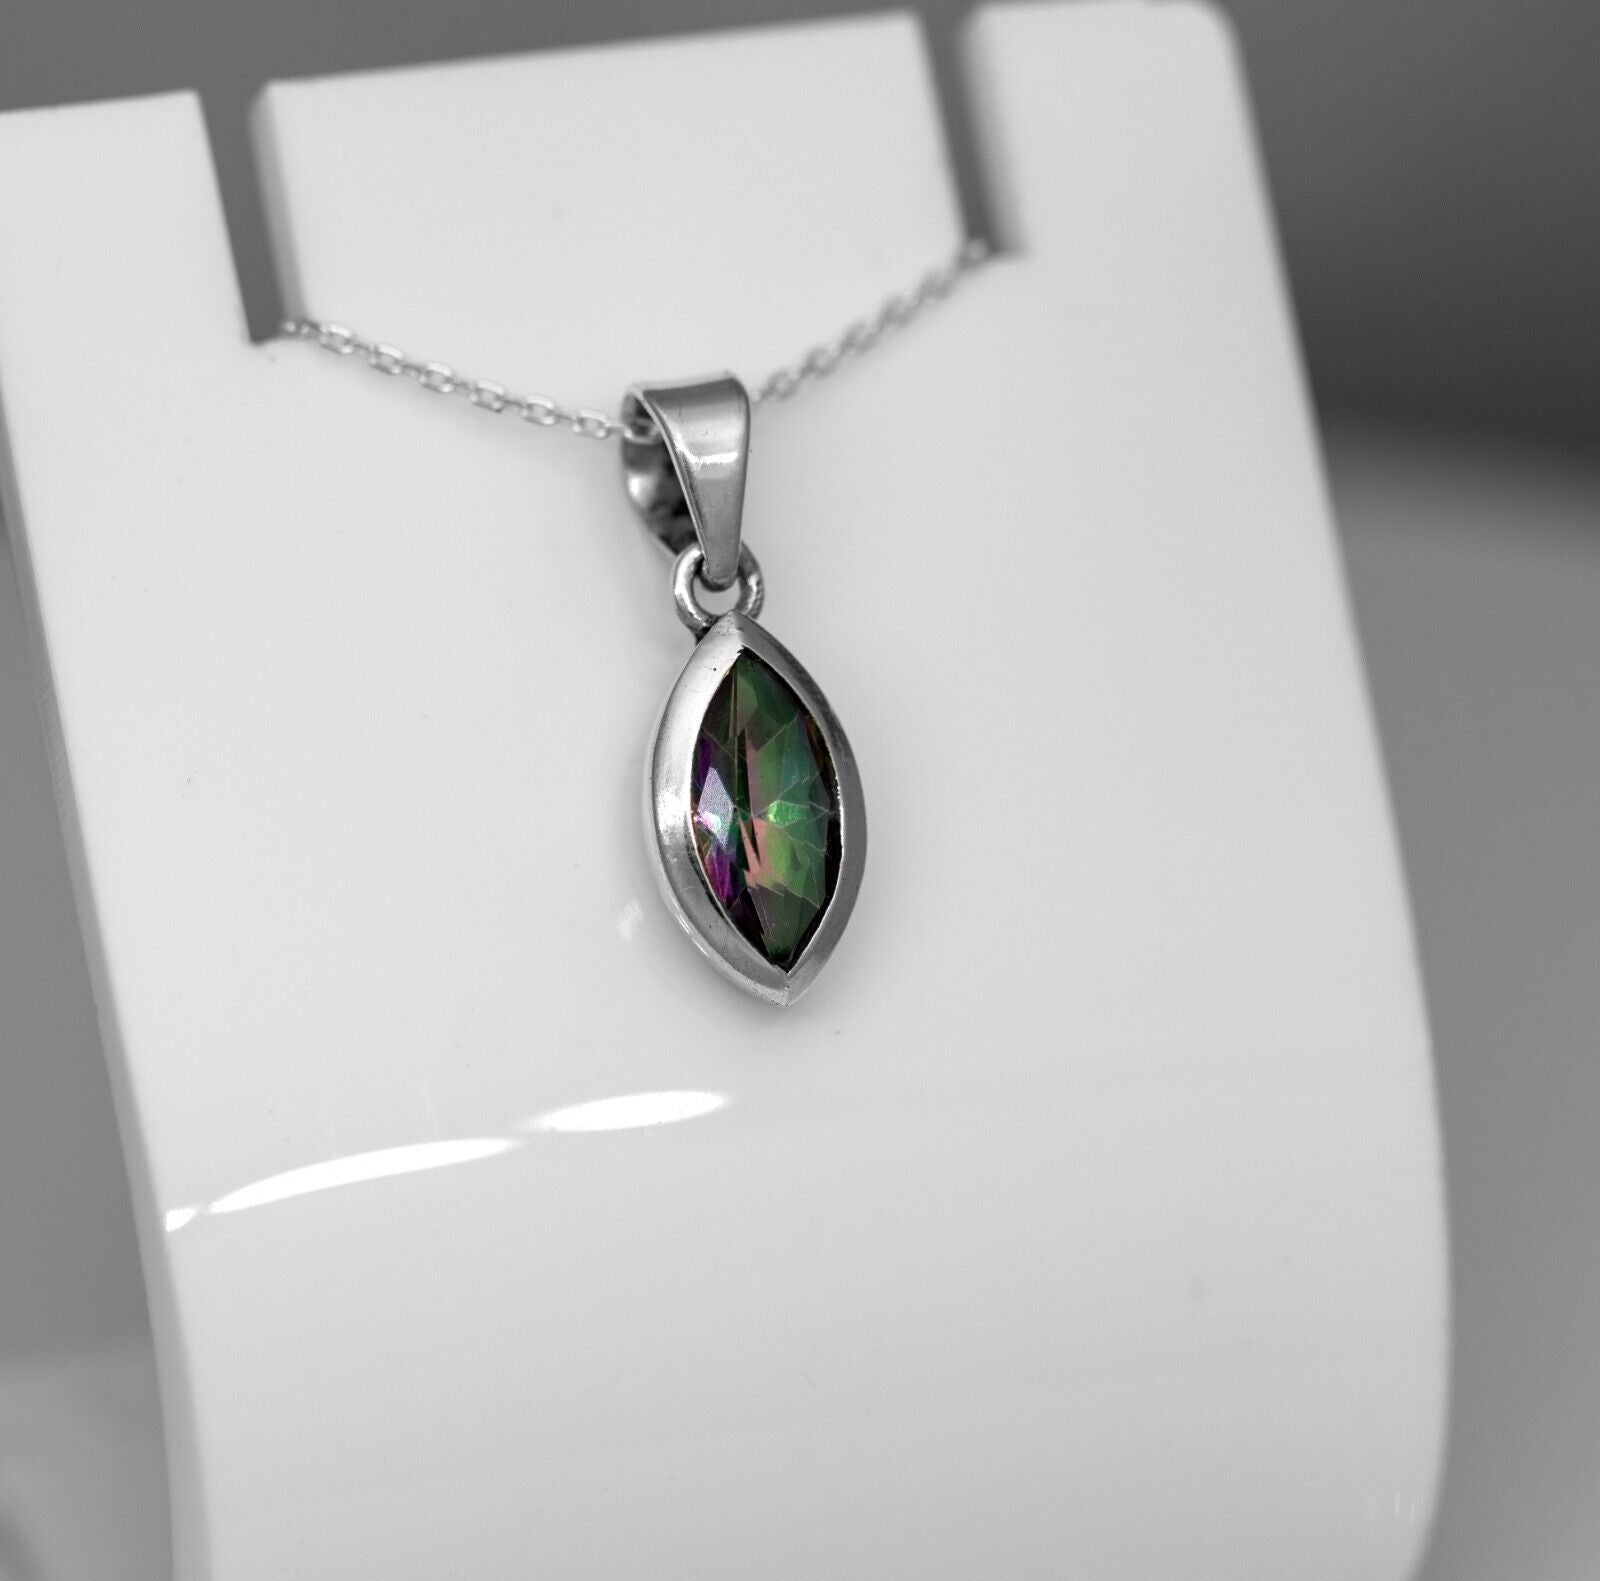 Sterling Silver 925 Marquise Cut Mystic Topaz Pendant Necklace Ladies Jewellery